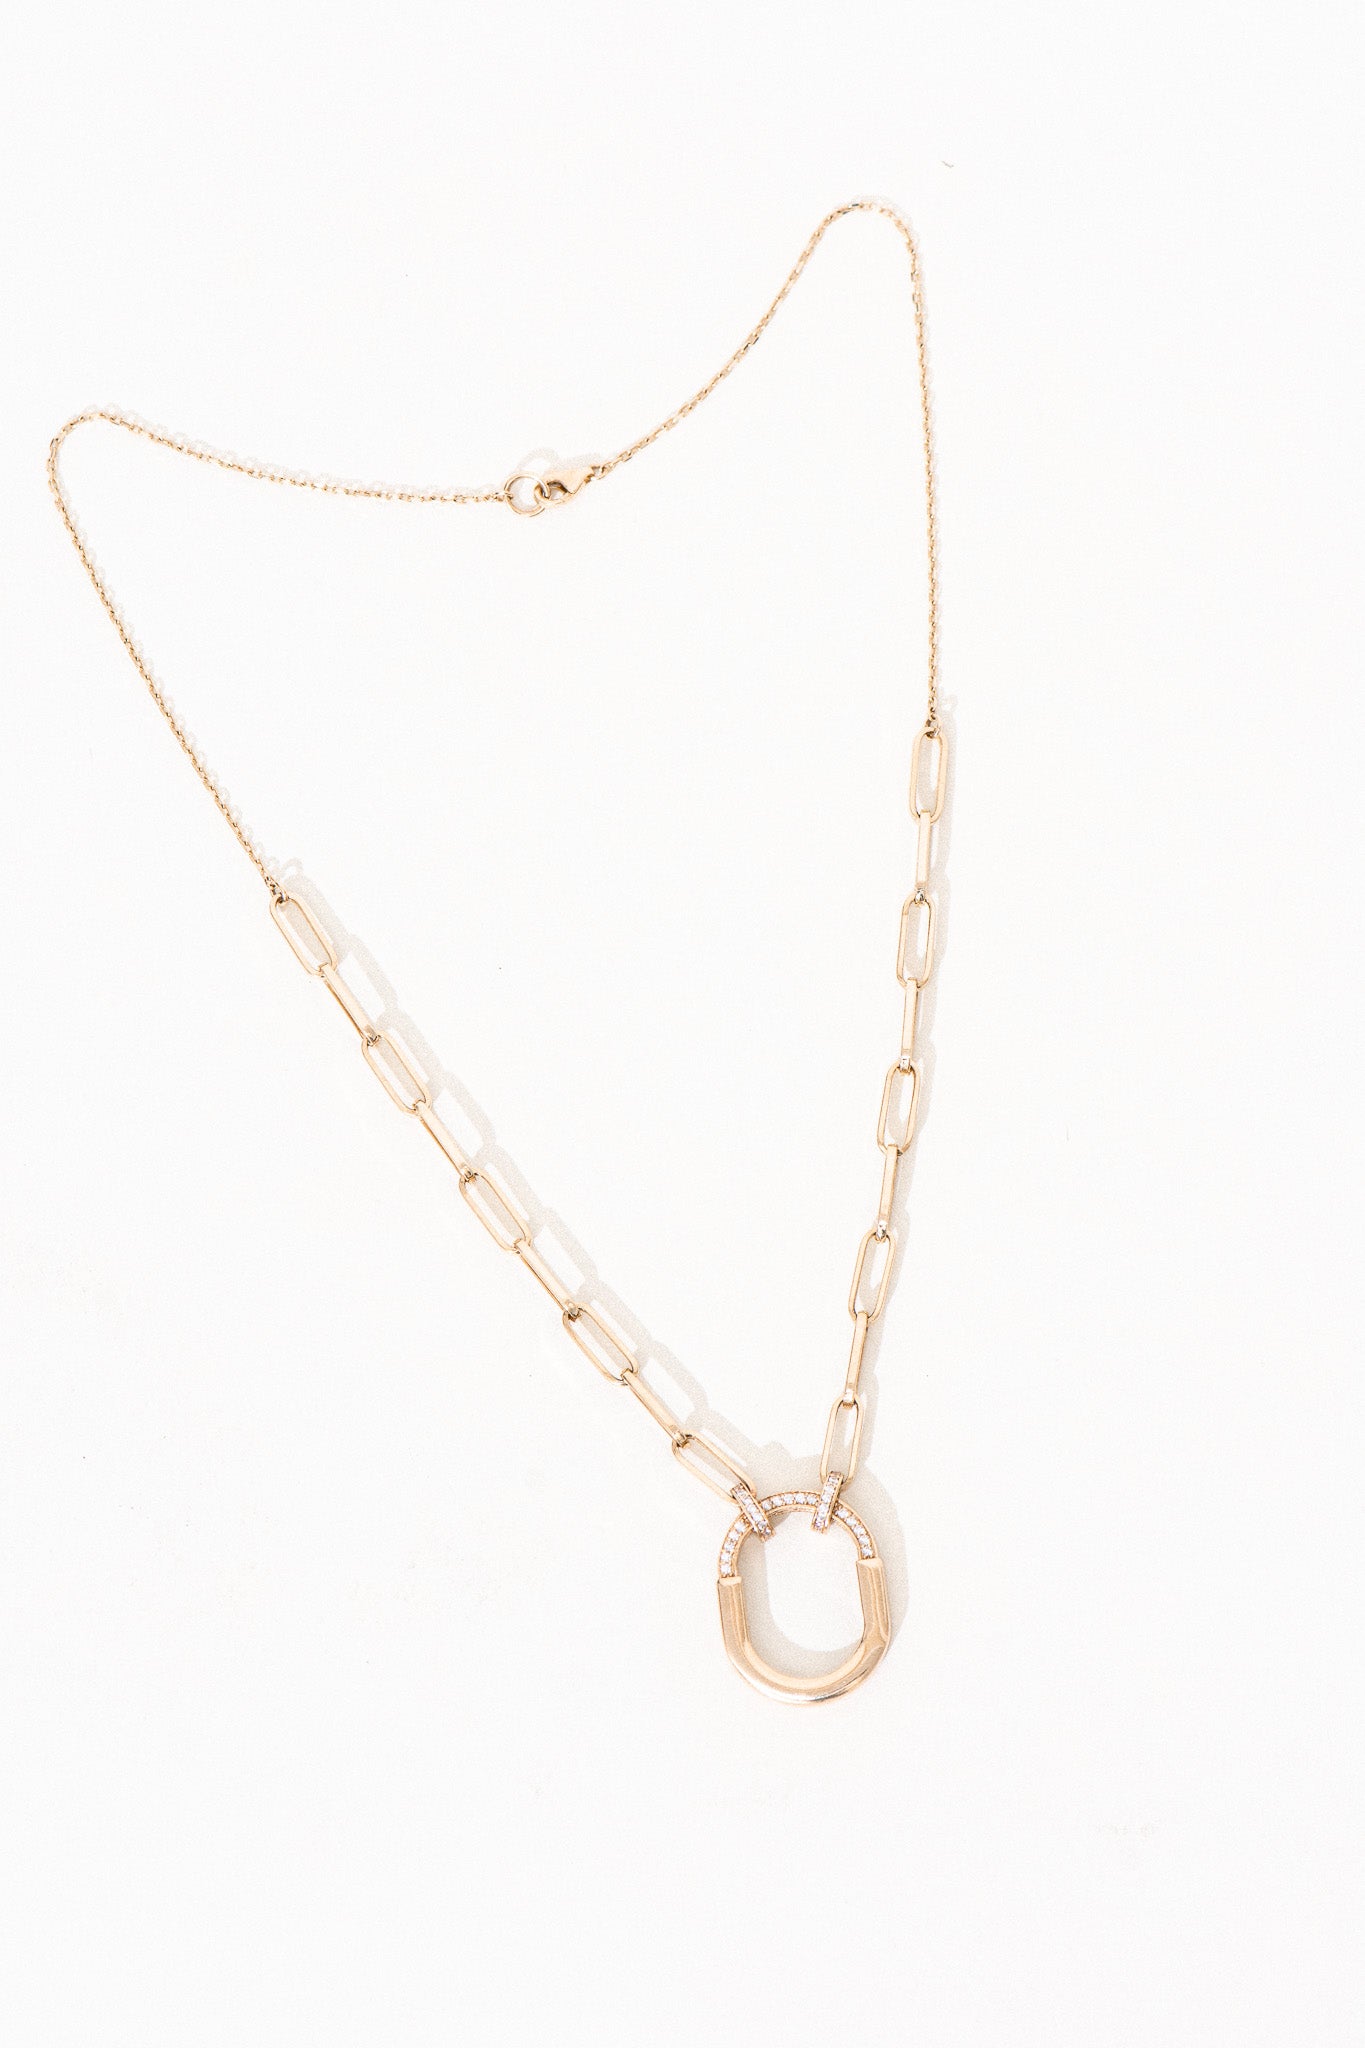 14K Yellow Gold Clip Chain Necklace with CZ Diamond Link Detail